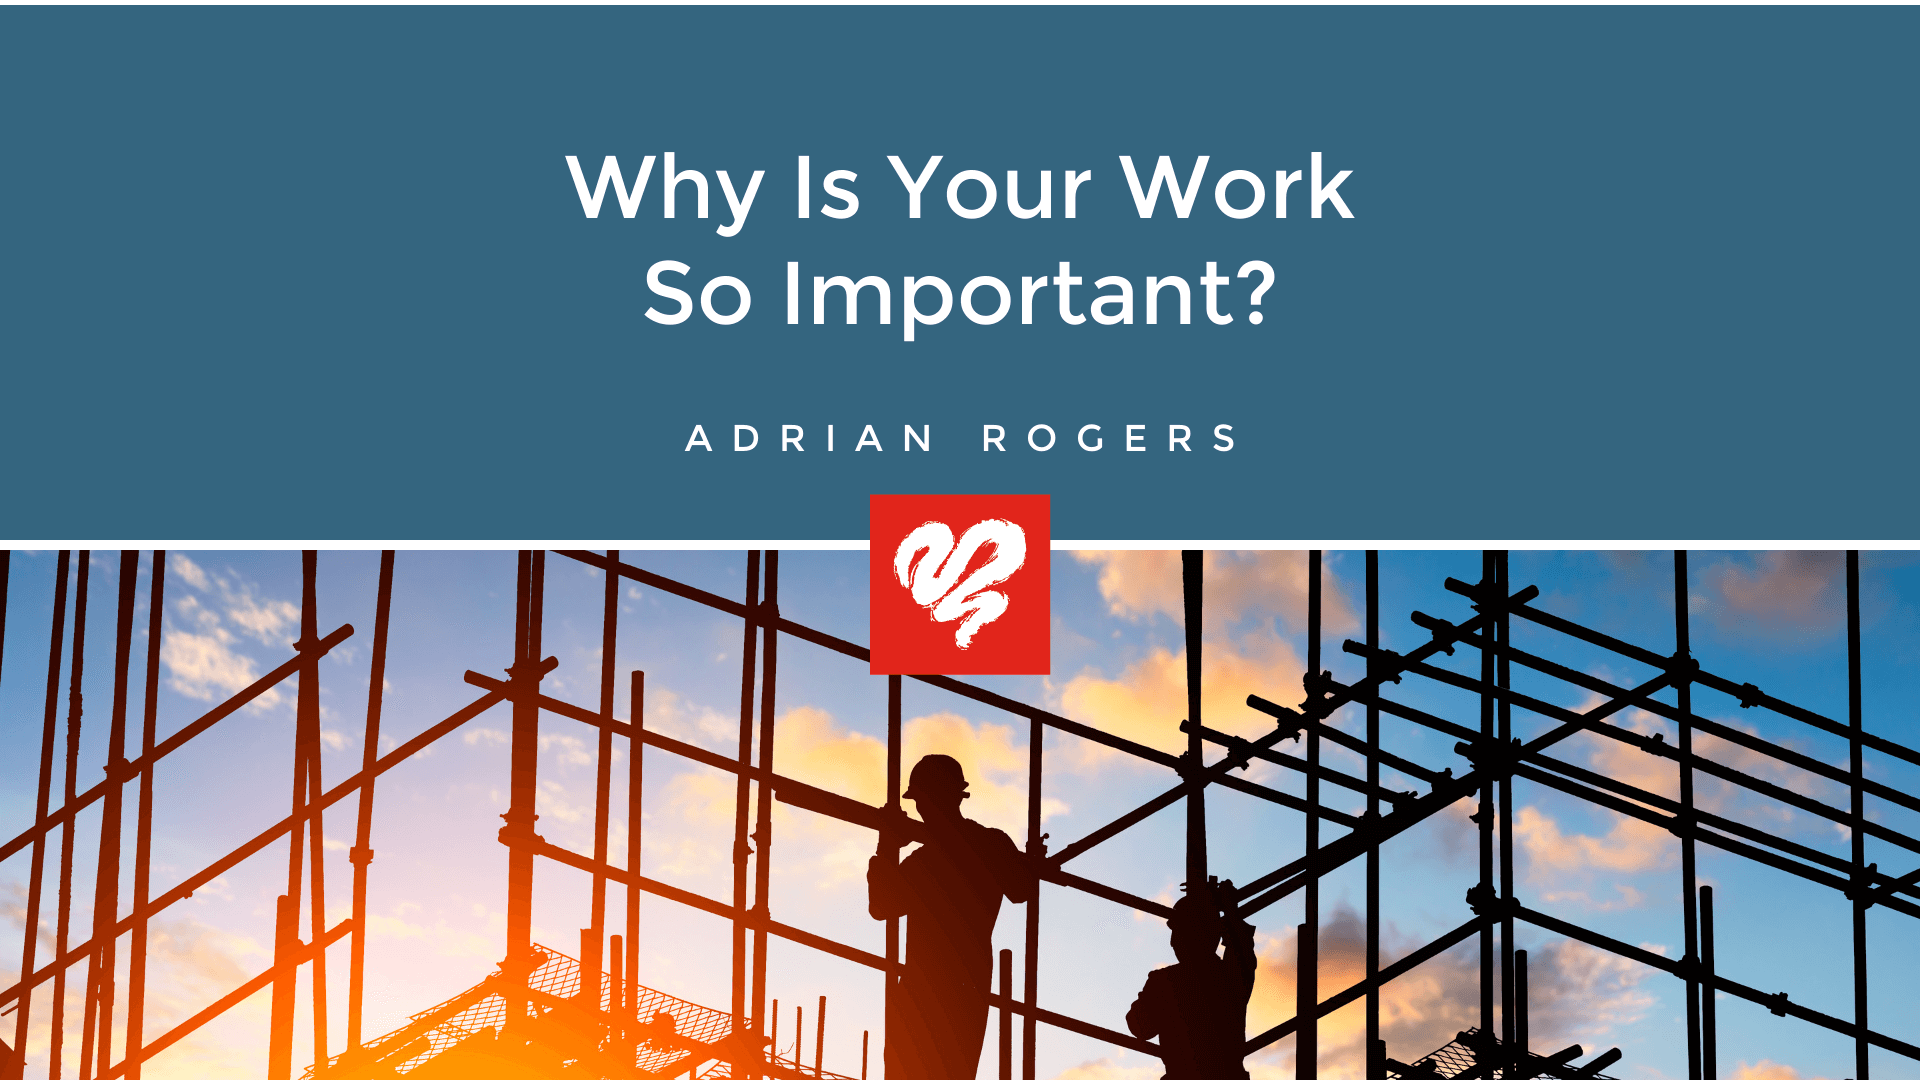 Why Is Your Work So Important 1920x1080 Article